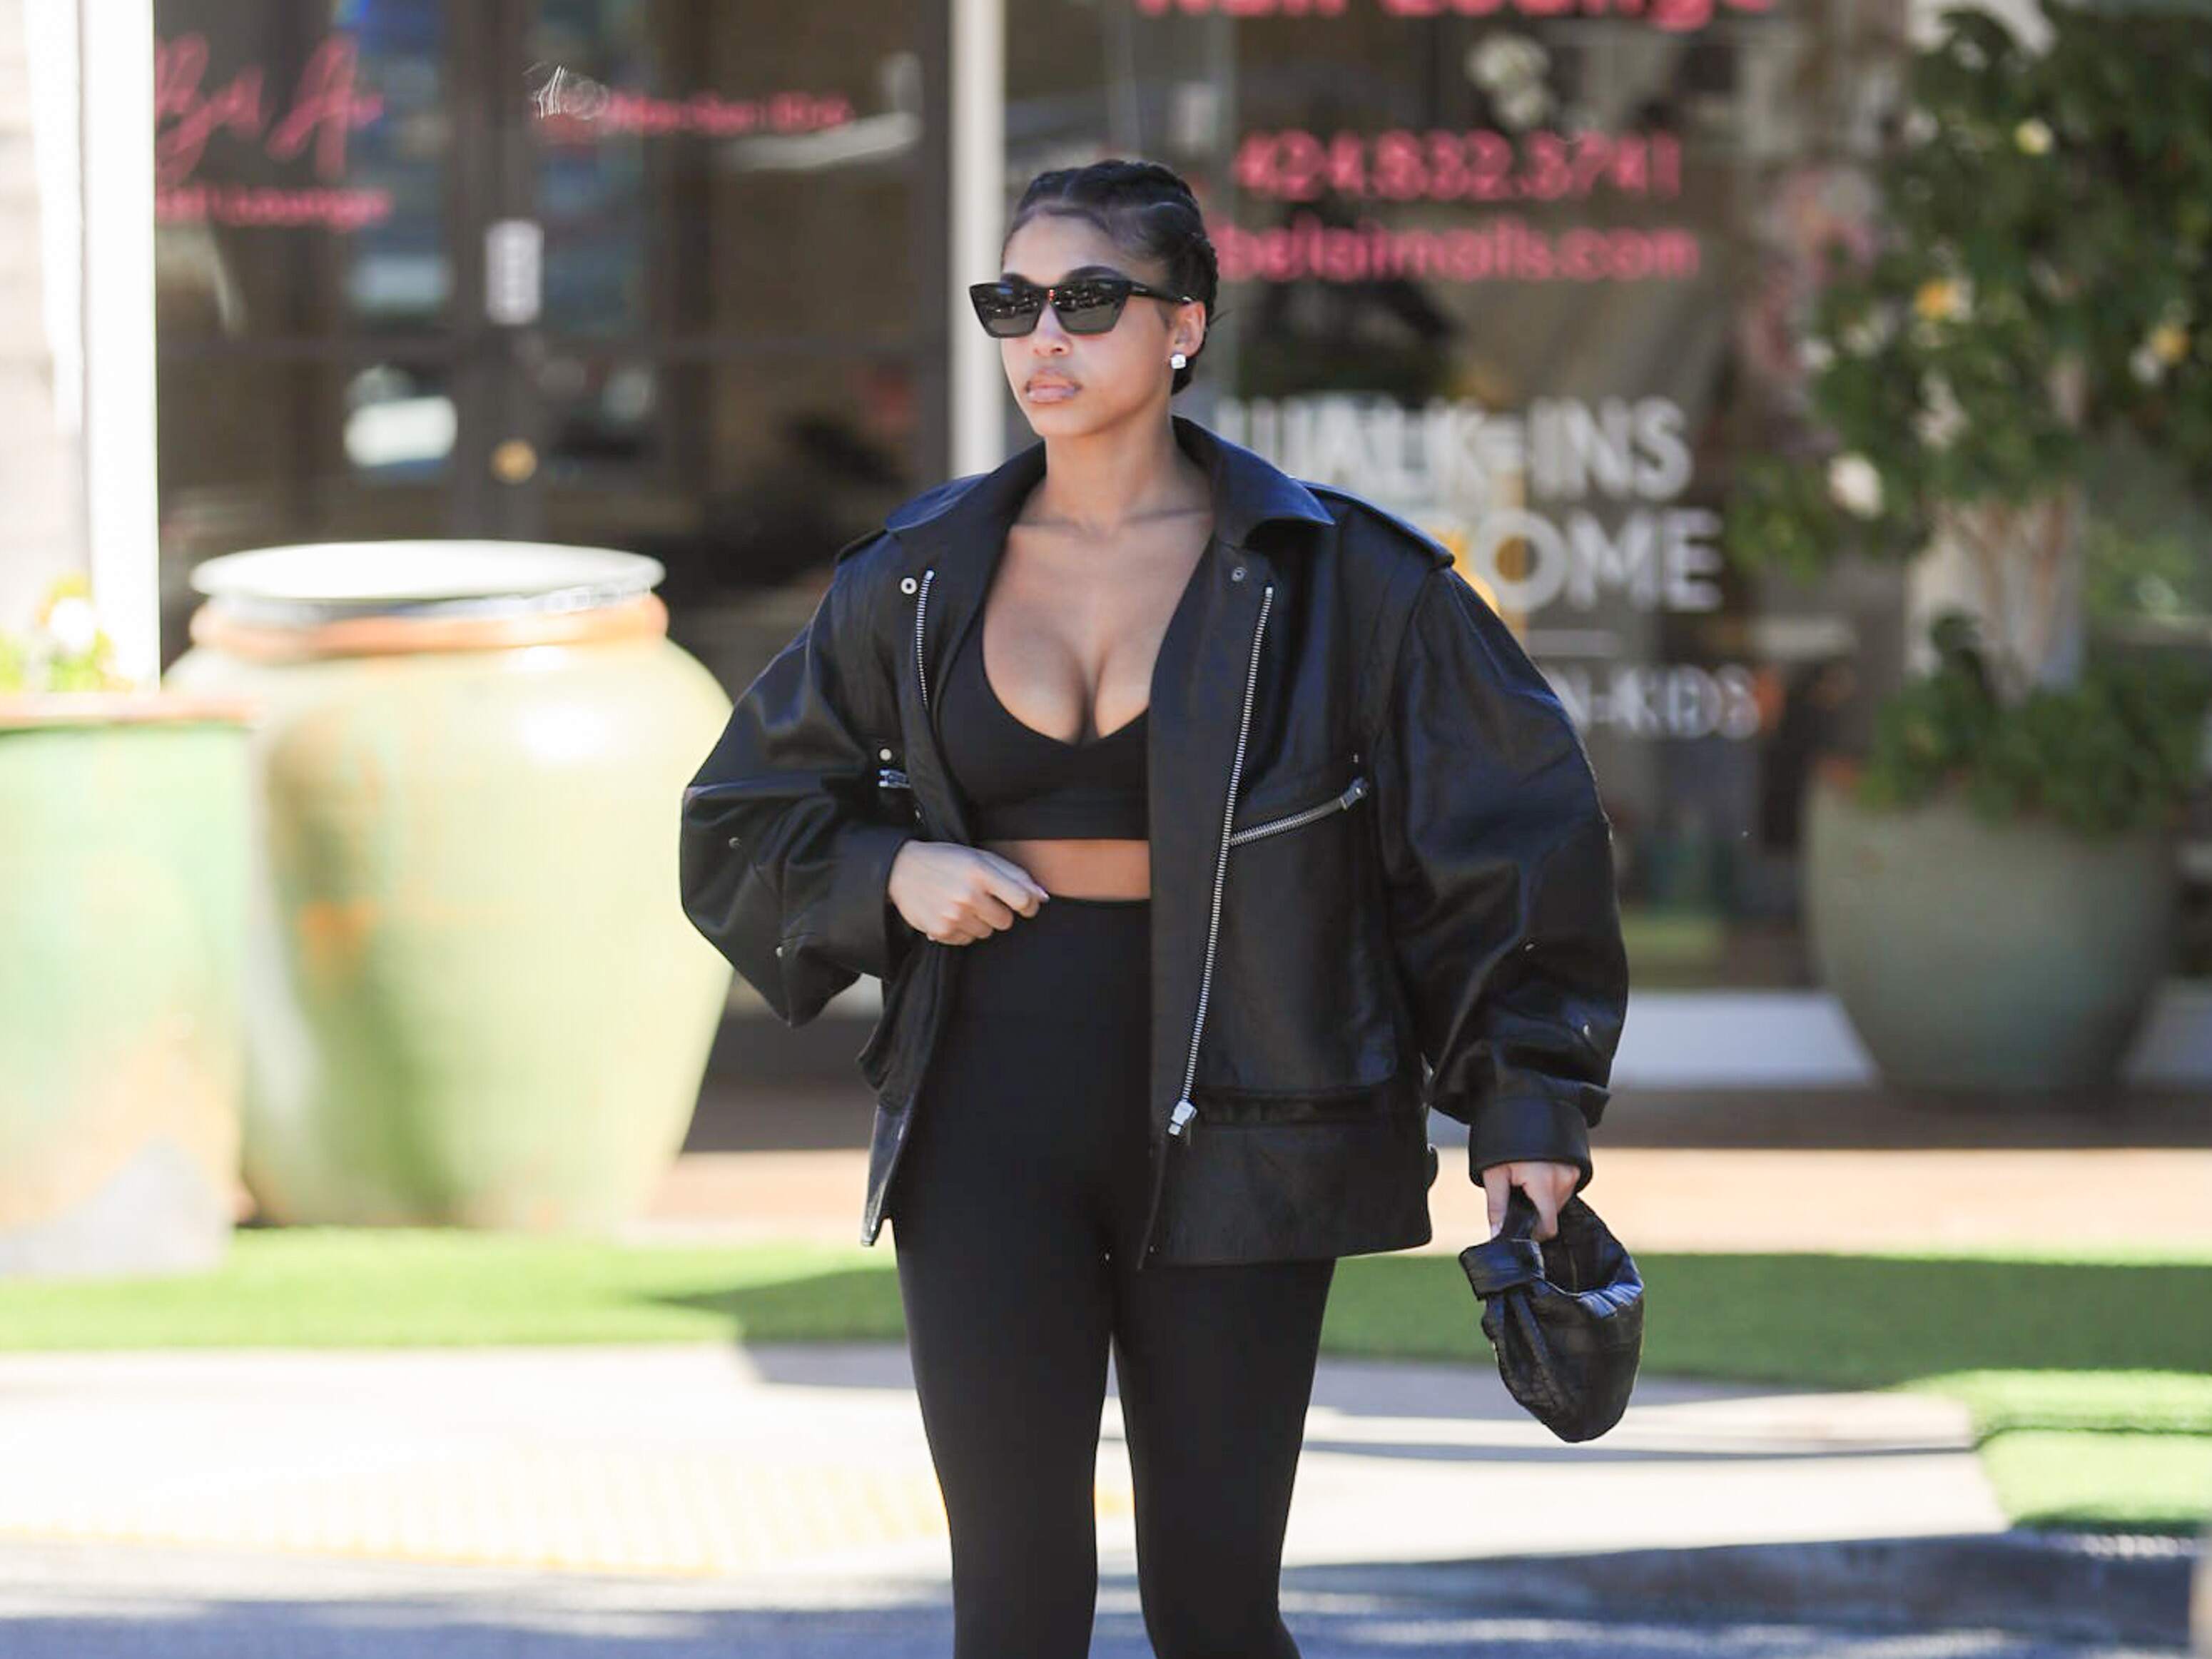 Model Lori Harvey picks up an iced coffee on a sunny day in LA while wearing a leather jacket and black leggings